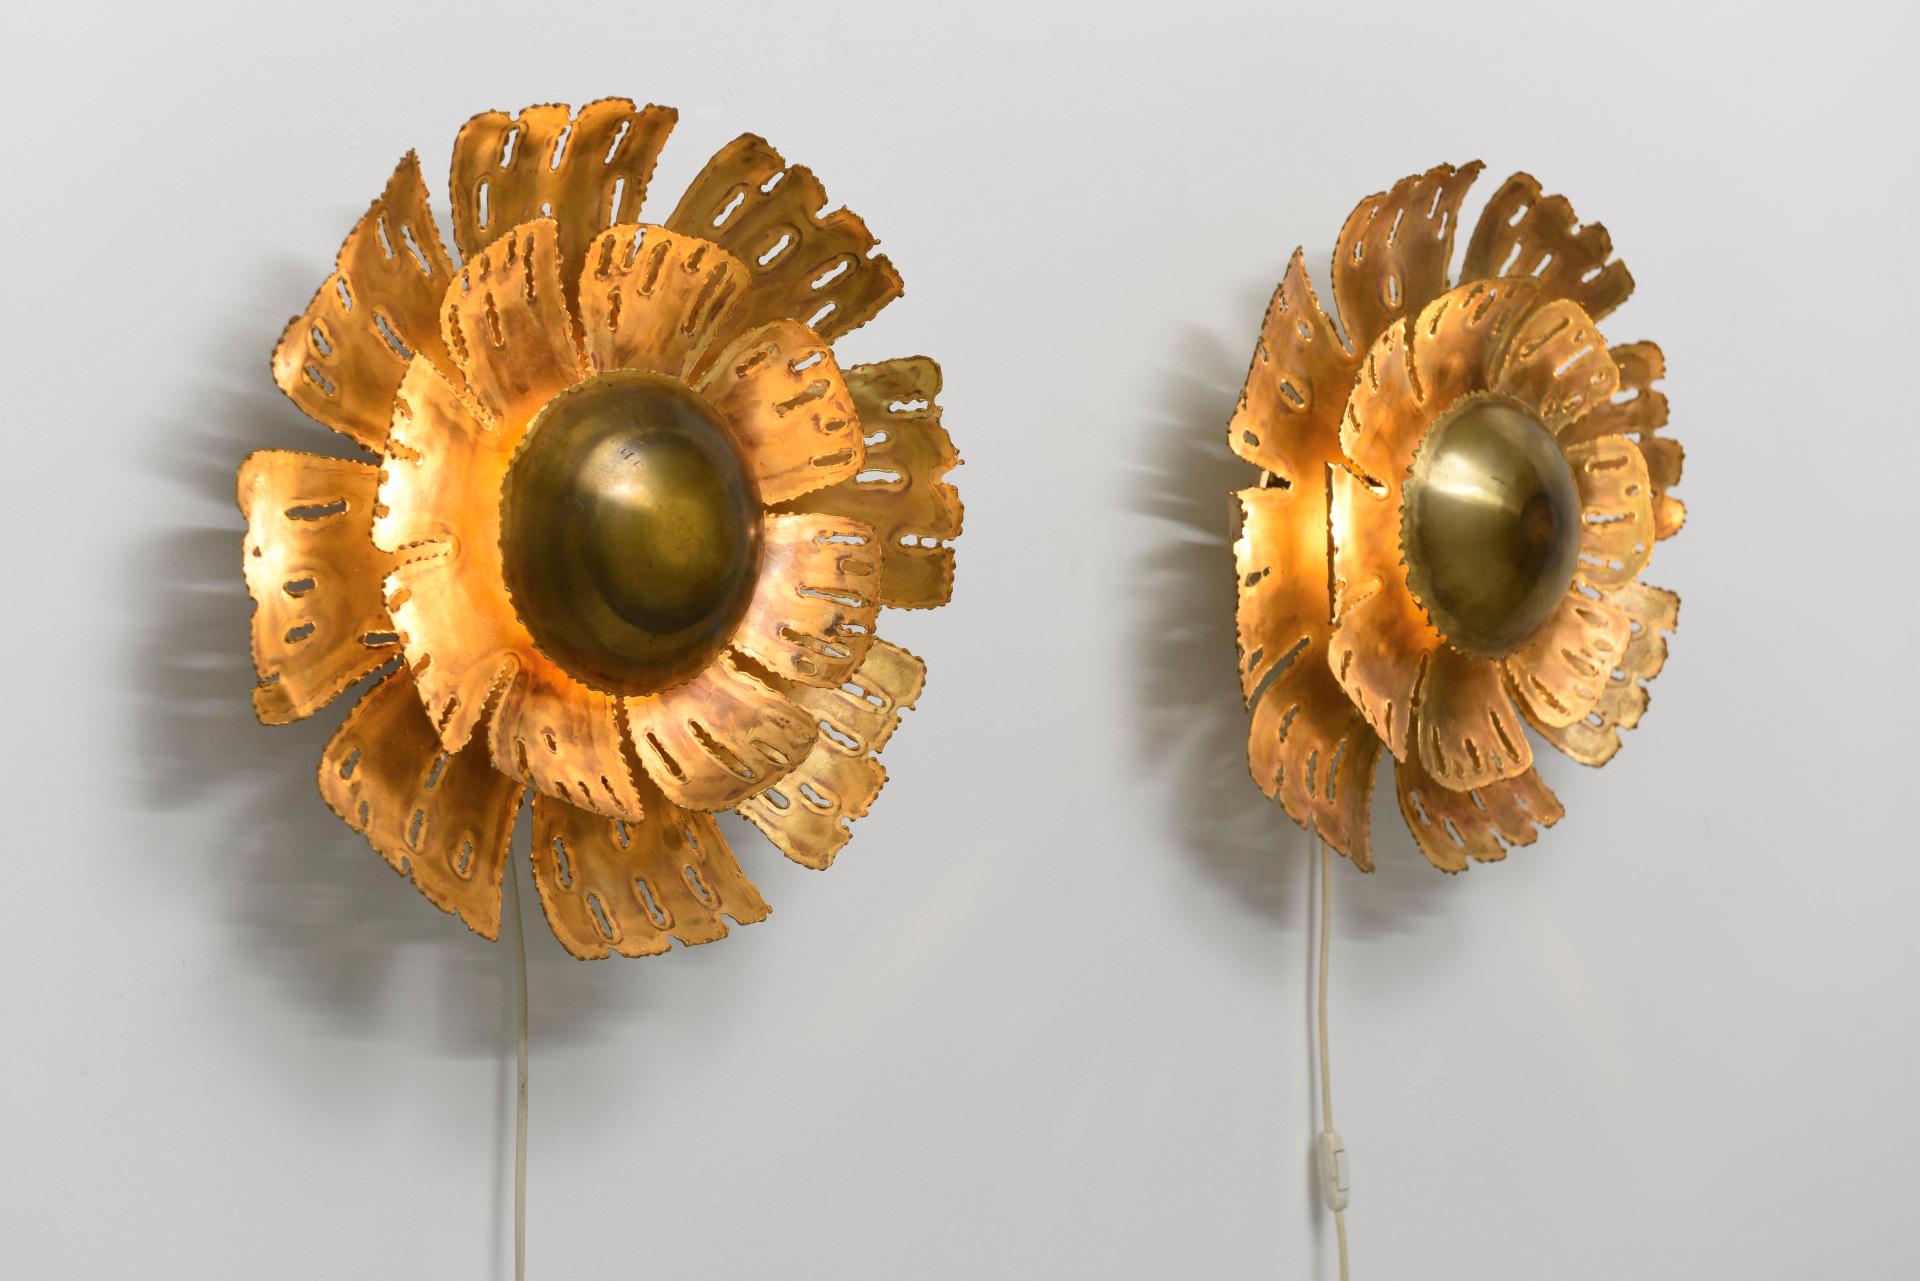 Pair of large ‘Flower’ brass wall lamps from the 1960s. Brutalist design by Svend Aage Holm Sørensen for Holm Sørensen & Co. Made in Denmark. 

